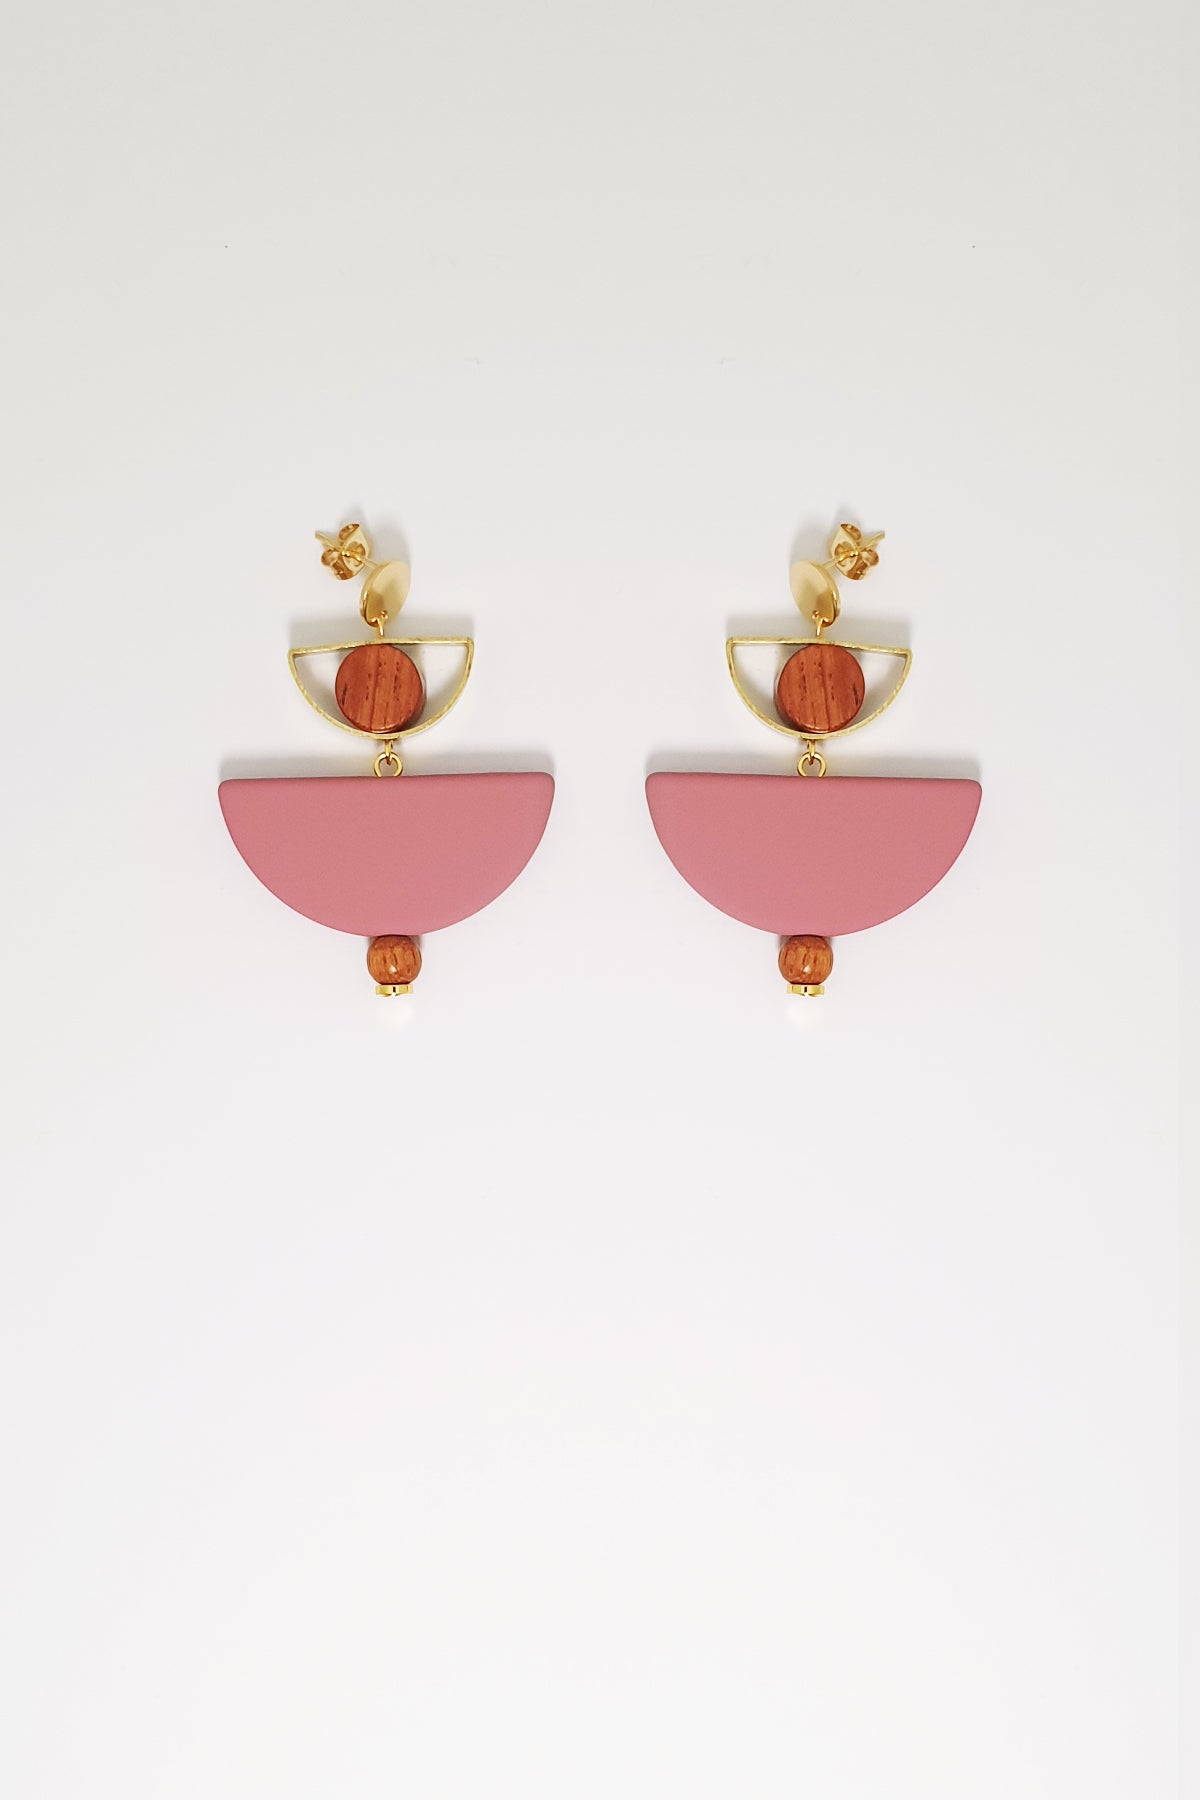  A pair of stud dangle earrings sit against a white background. They feature a small half circle brass piece with a wooden circle bead enclosed, below this hangs a grape D shape bead followed by a small wooden bead and a tiny gold bead.